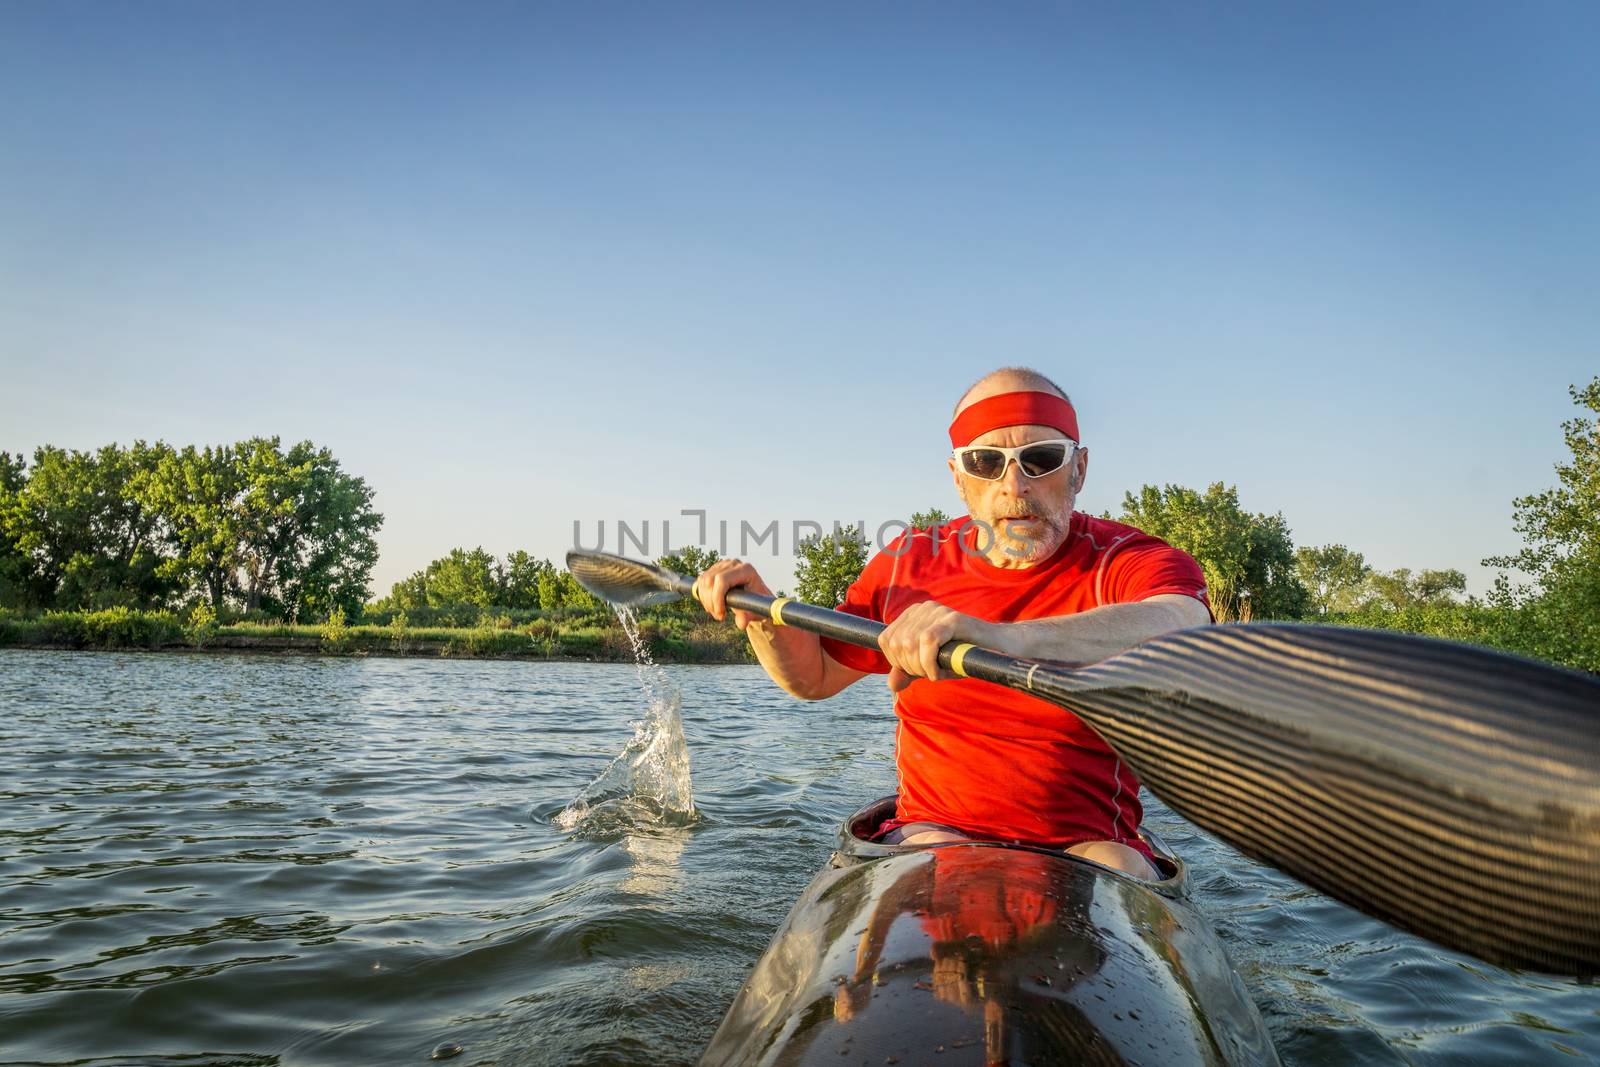 senior male paddler training in a racing sea kayak with a wing paddle on a lake, motion blur of paddle